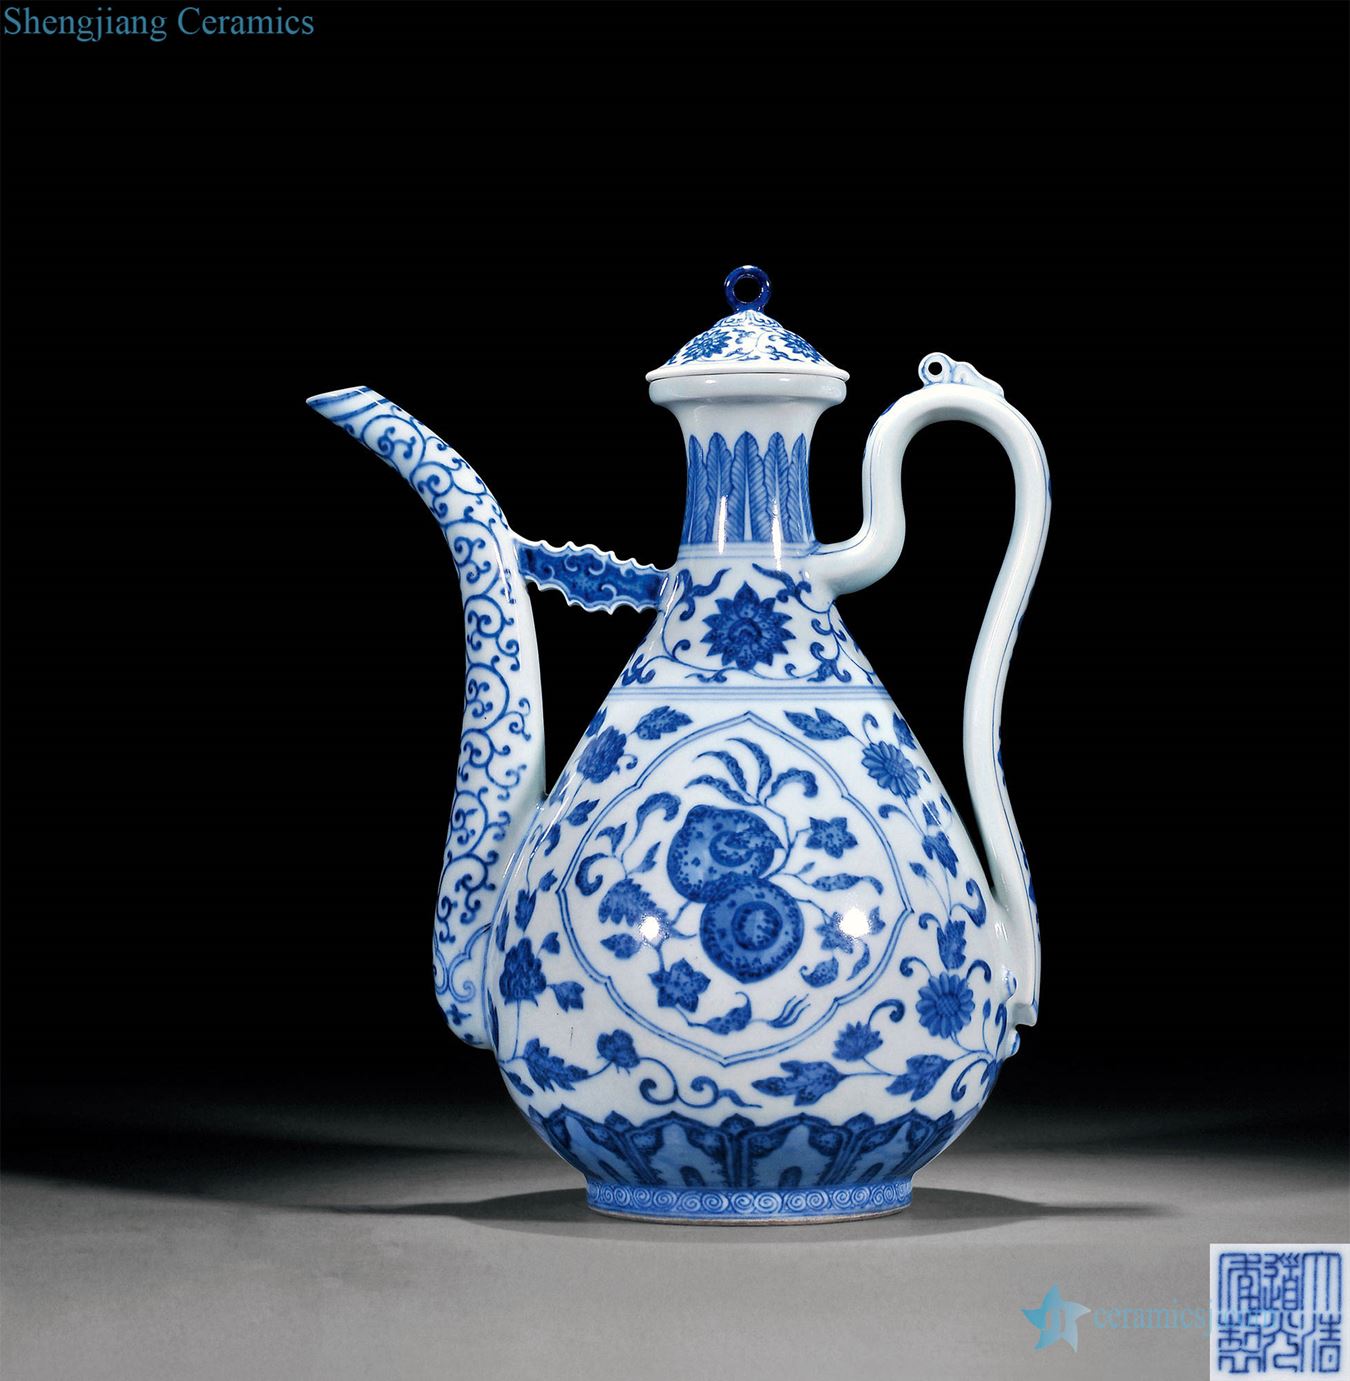 Qing daoguang Imitated yongle blue and white flower medallion flower fruit grain okho spring ewer fold branches